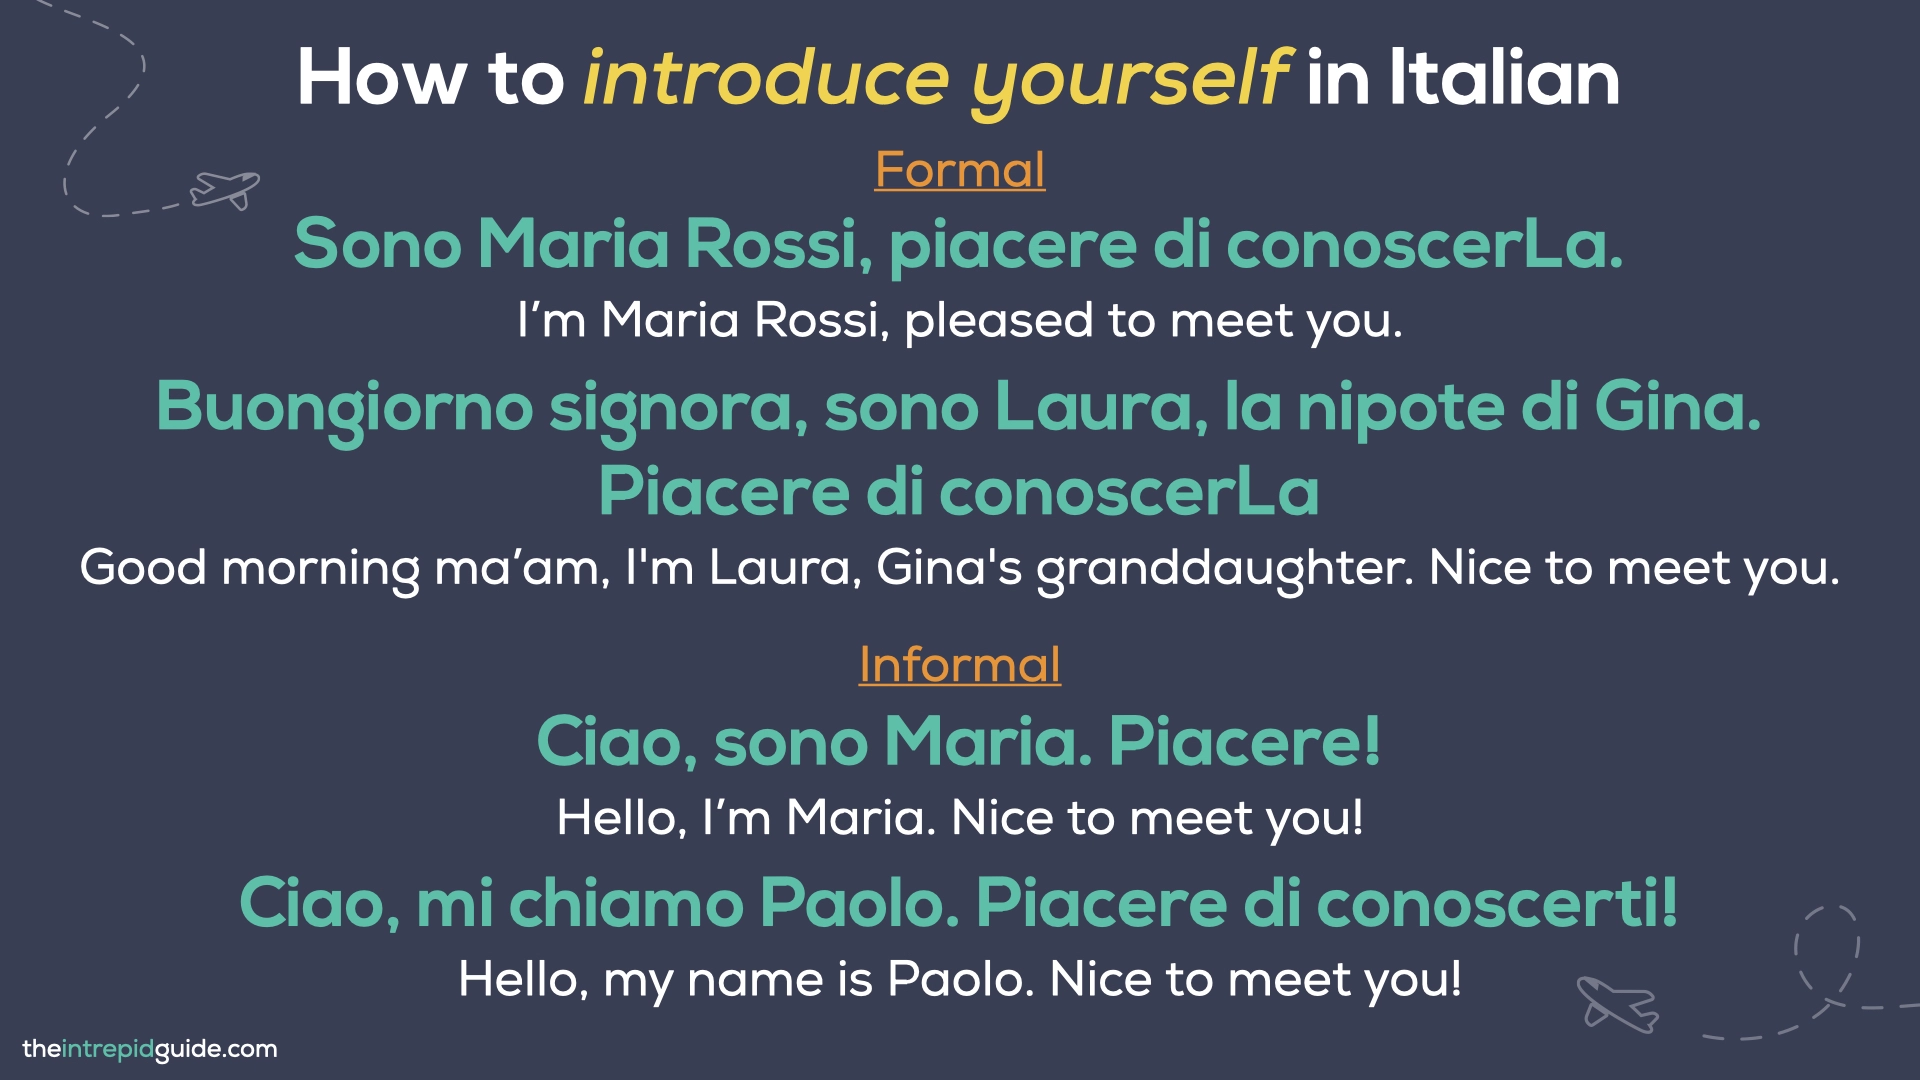 How to introduce yourself in Italian - Formal and Informal introductions